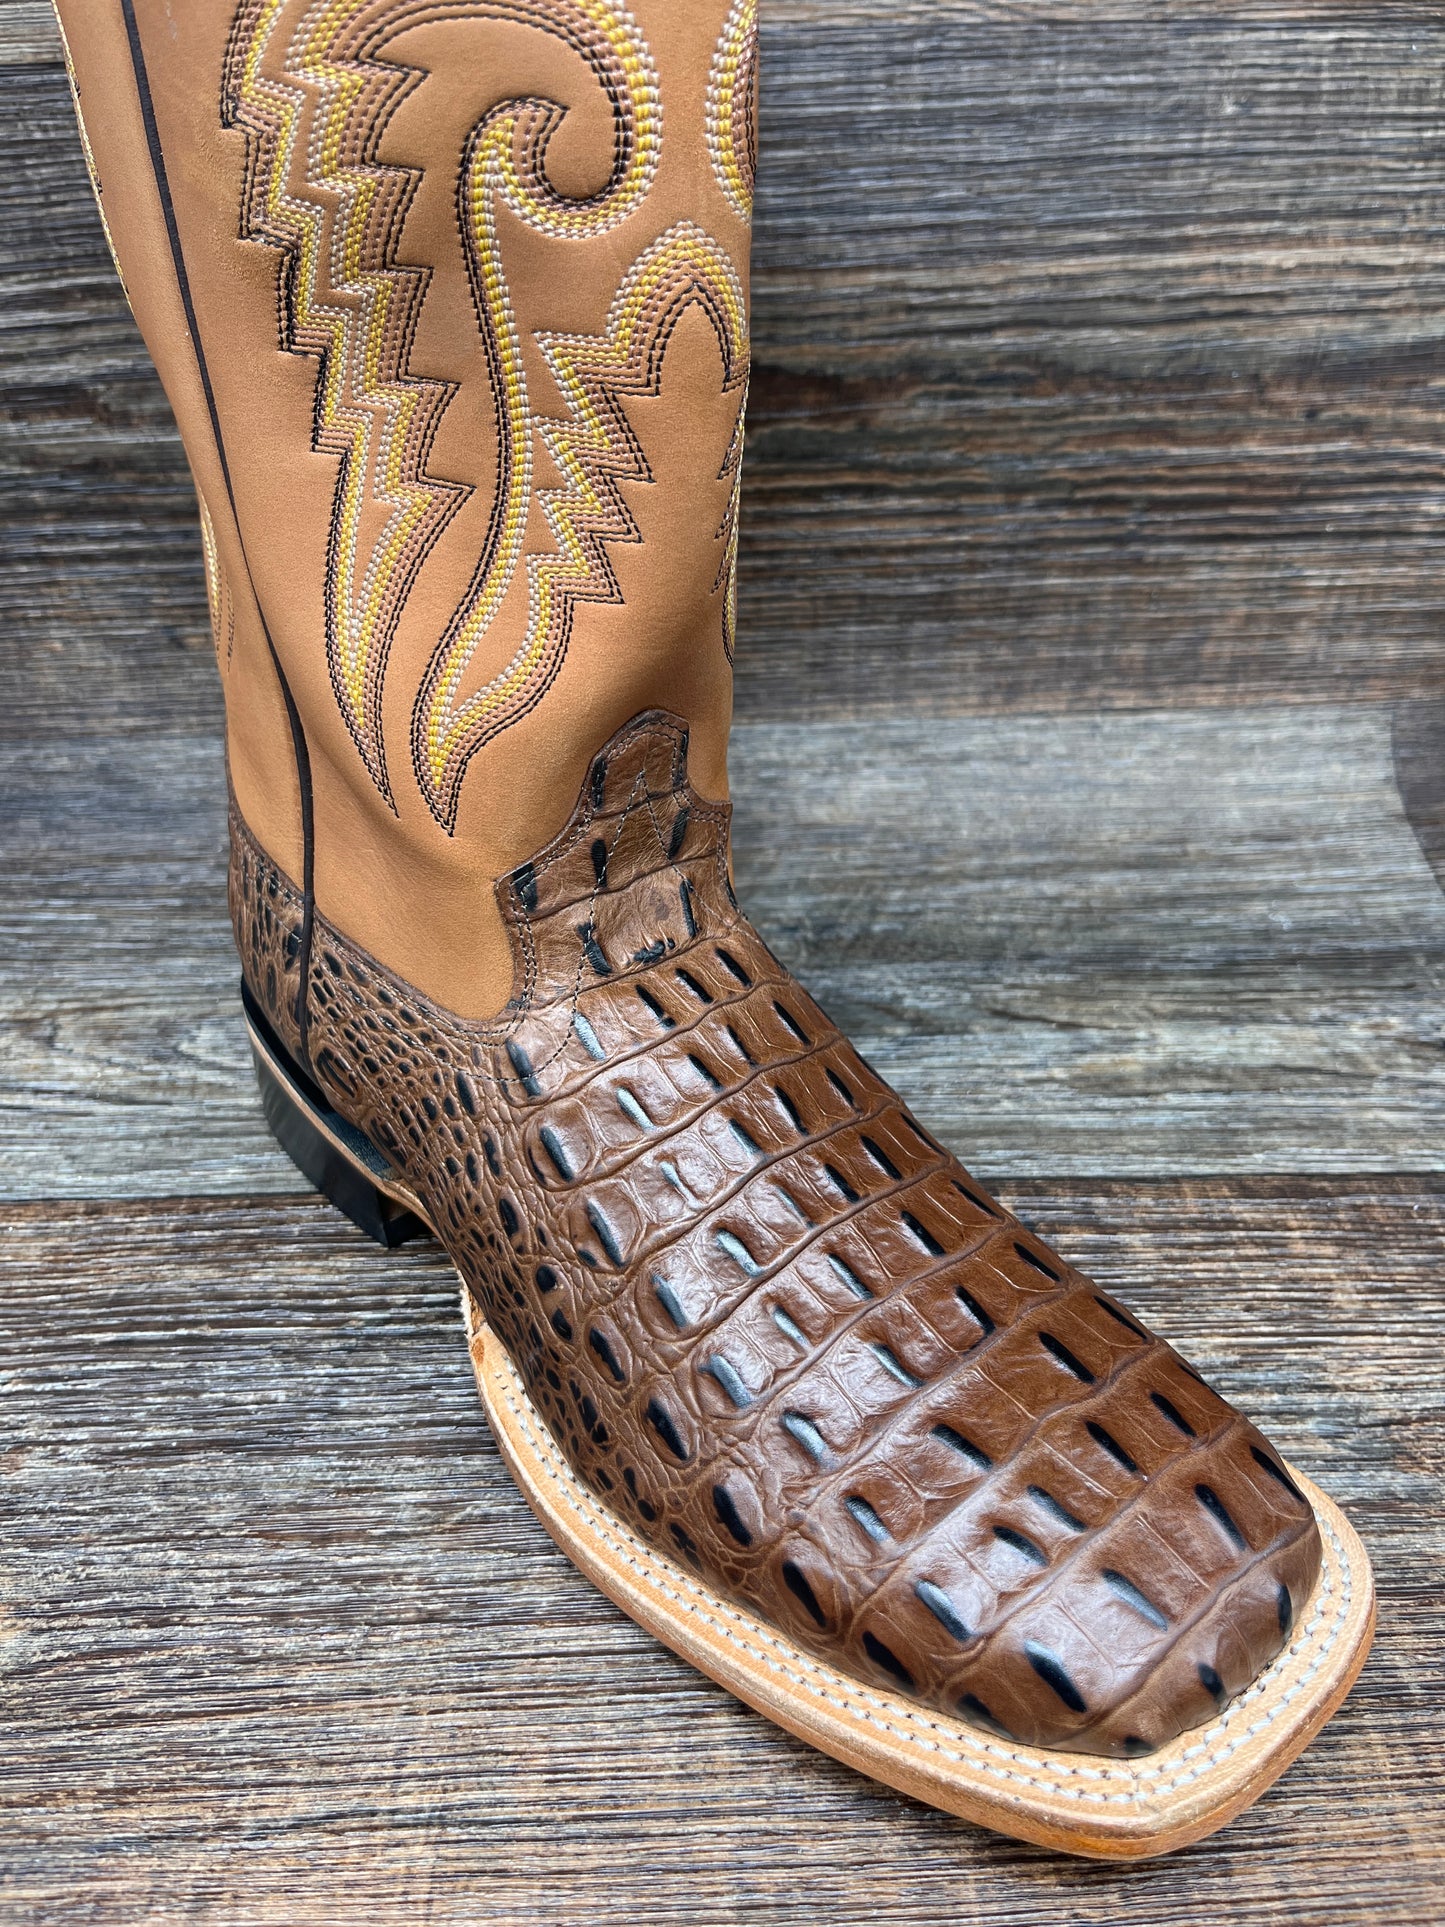 bsm1886 Men's Cowhide Alligator Print Square Toe Western Boots by Old West